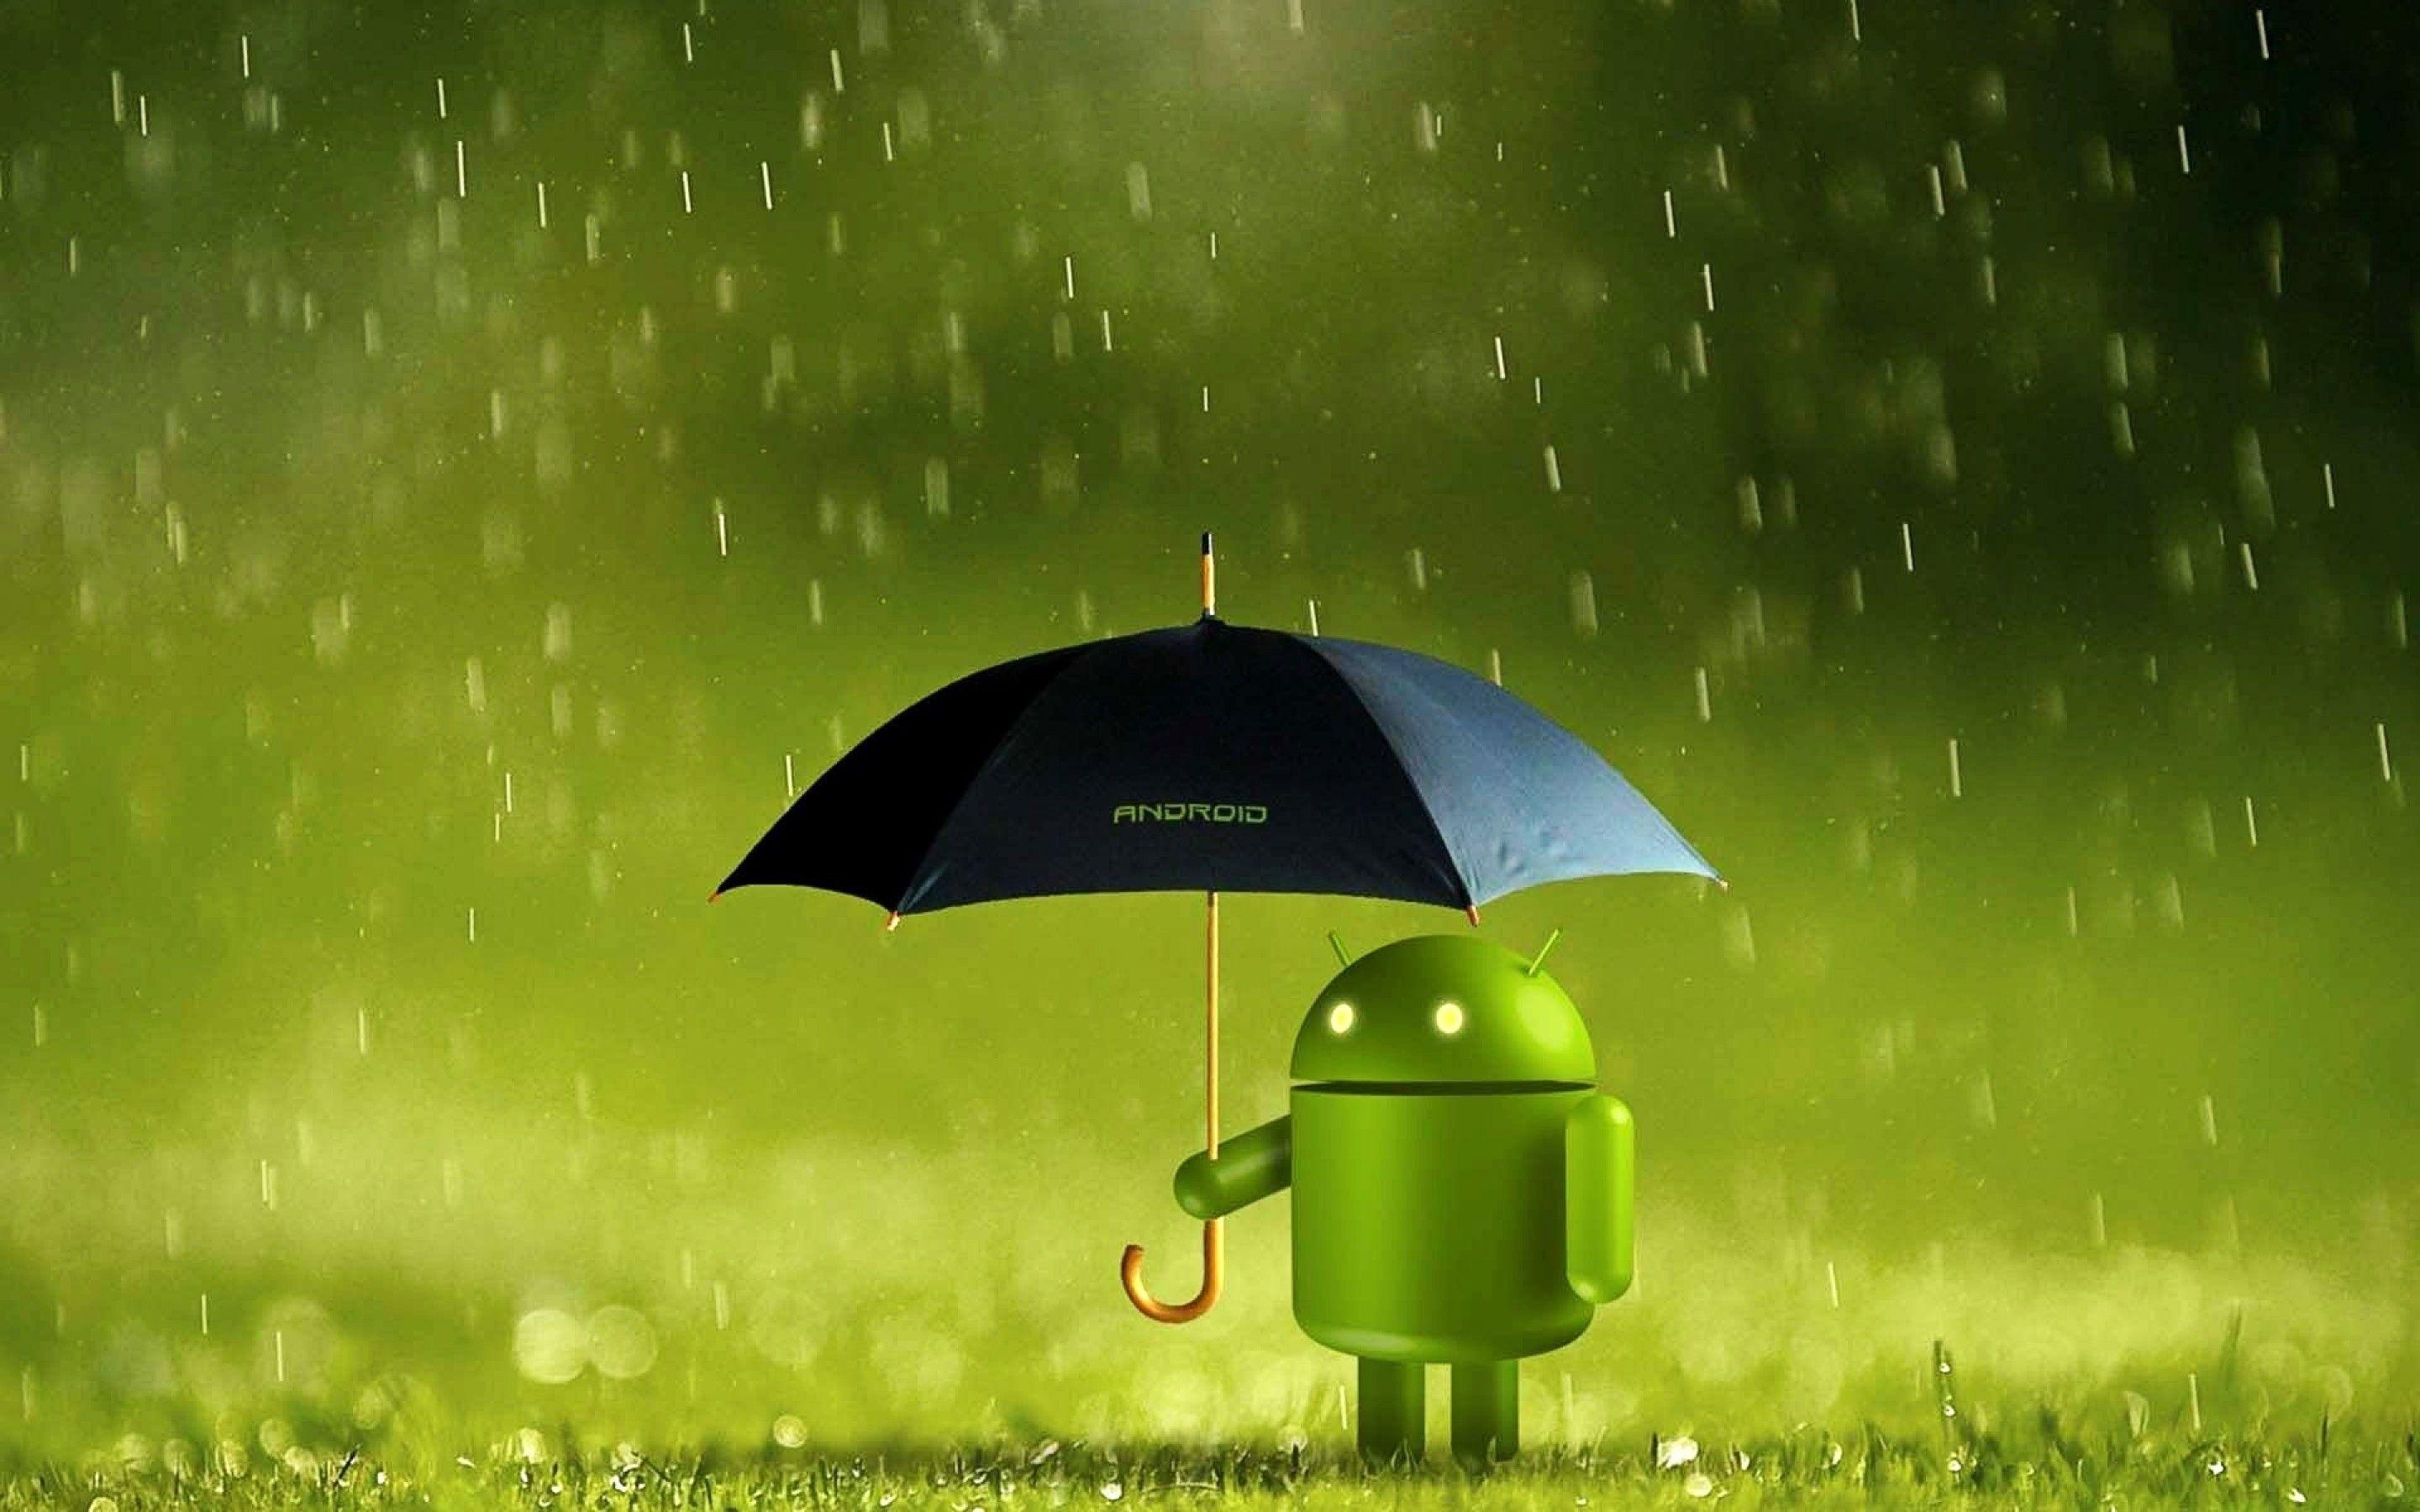 The best Android logo HD wallpaper. Papidroid: Android games without Google Play!